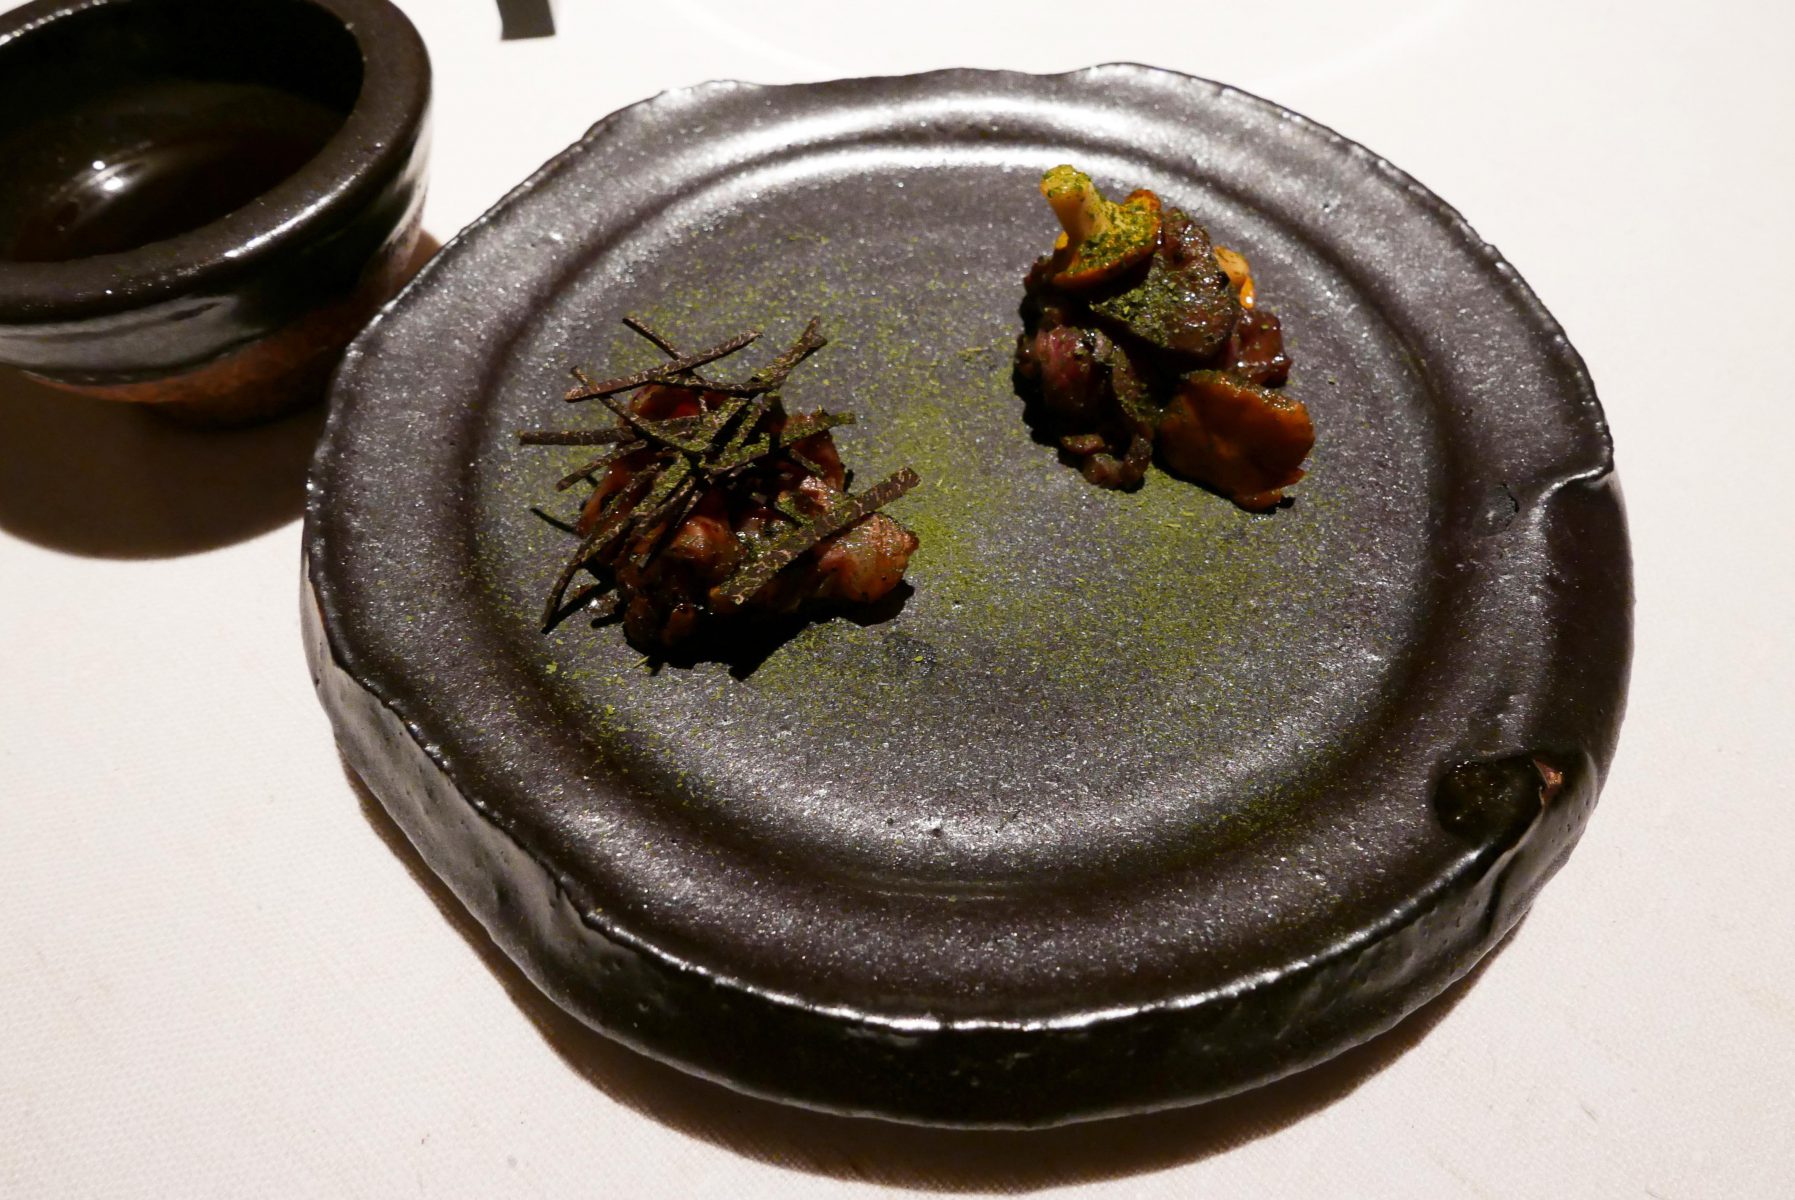 Kagoshima vs beef from Sweden with truffle ponzu,dried ramson and truffle in jus of grilled beef, fermented mushrooms